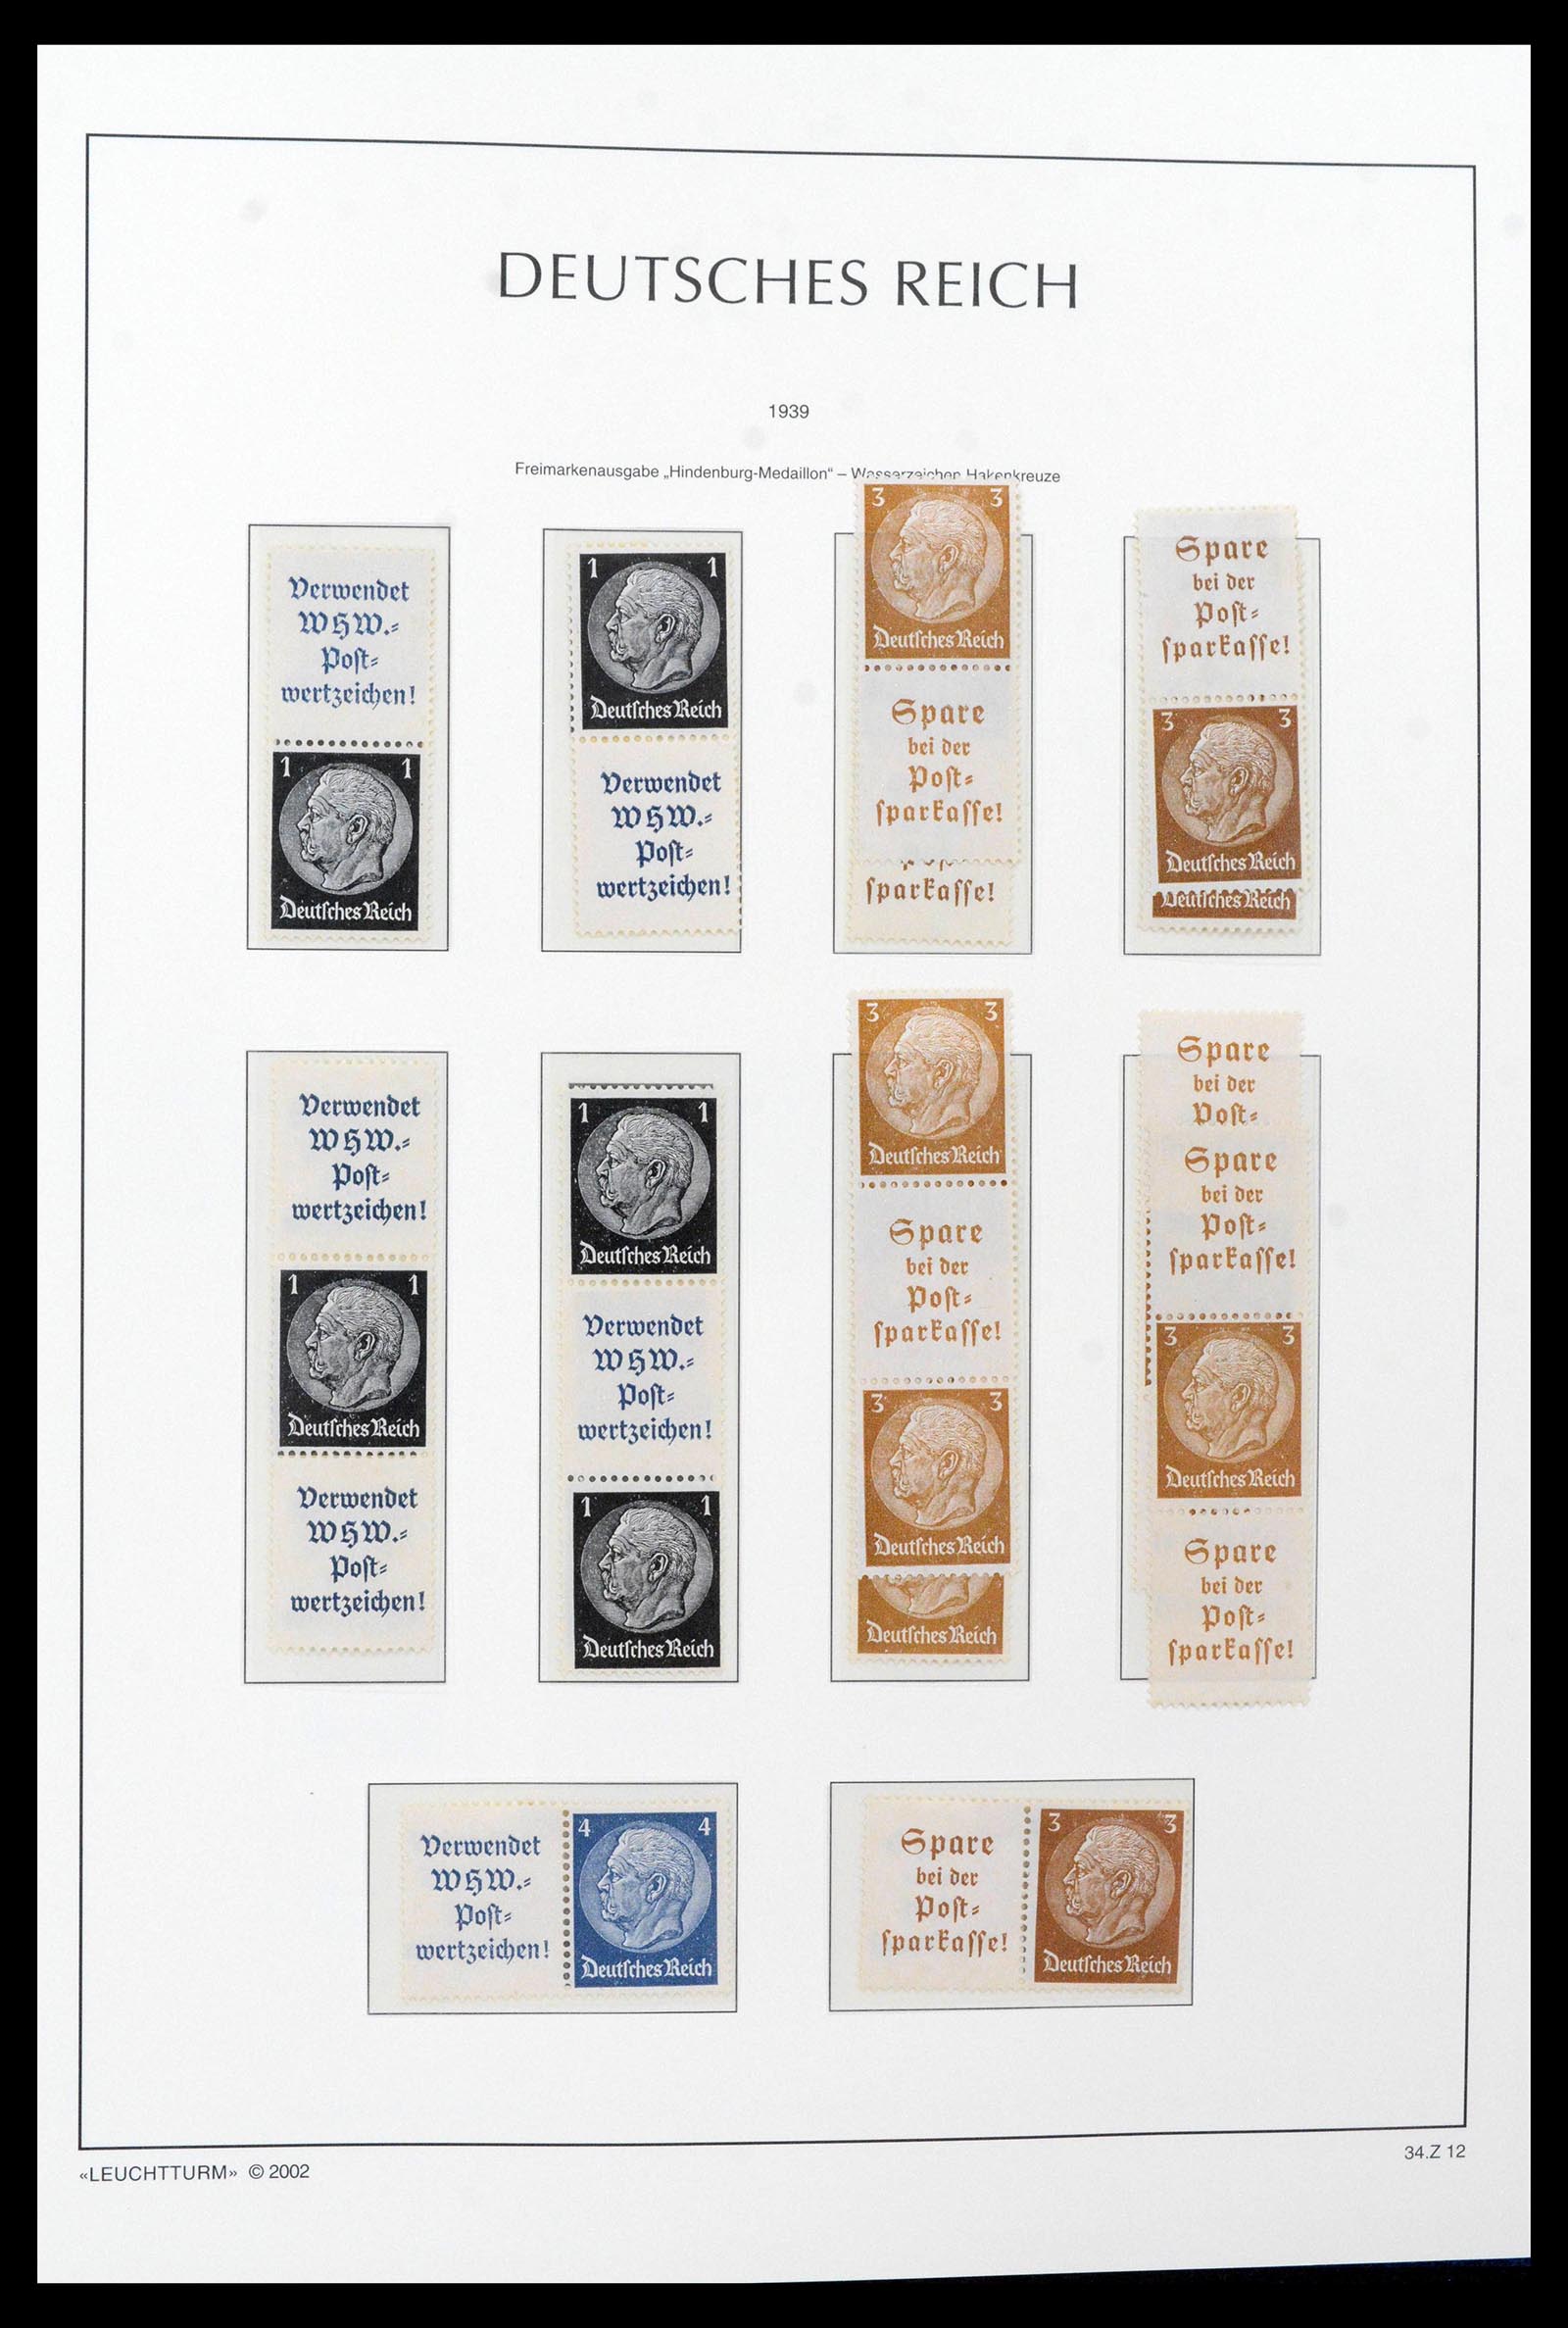 39045 0049 - Stamp collection 39045 German Reich combinations 1913-1941.